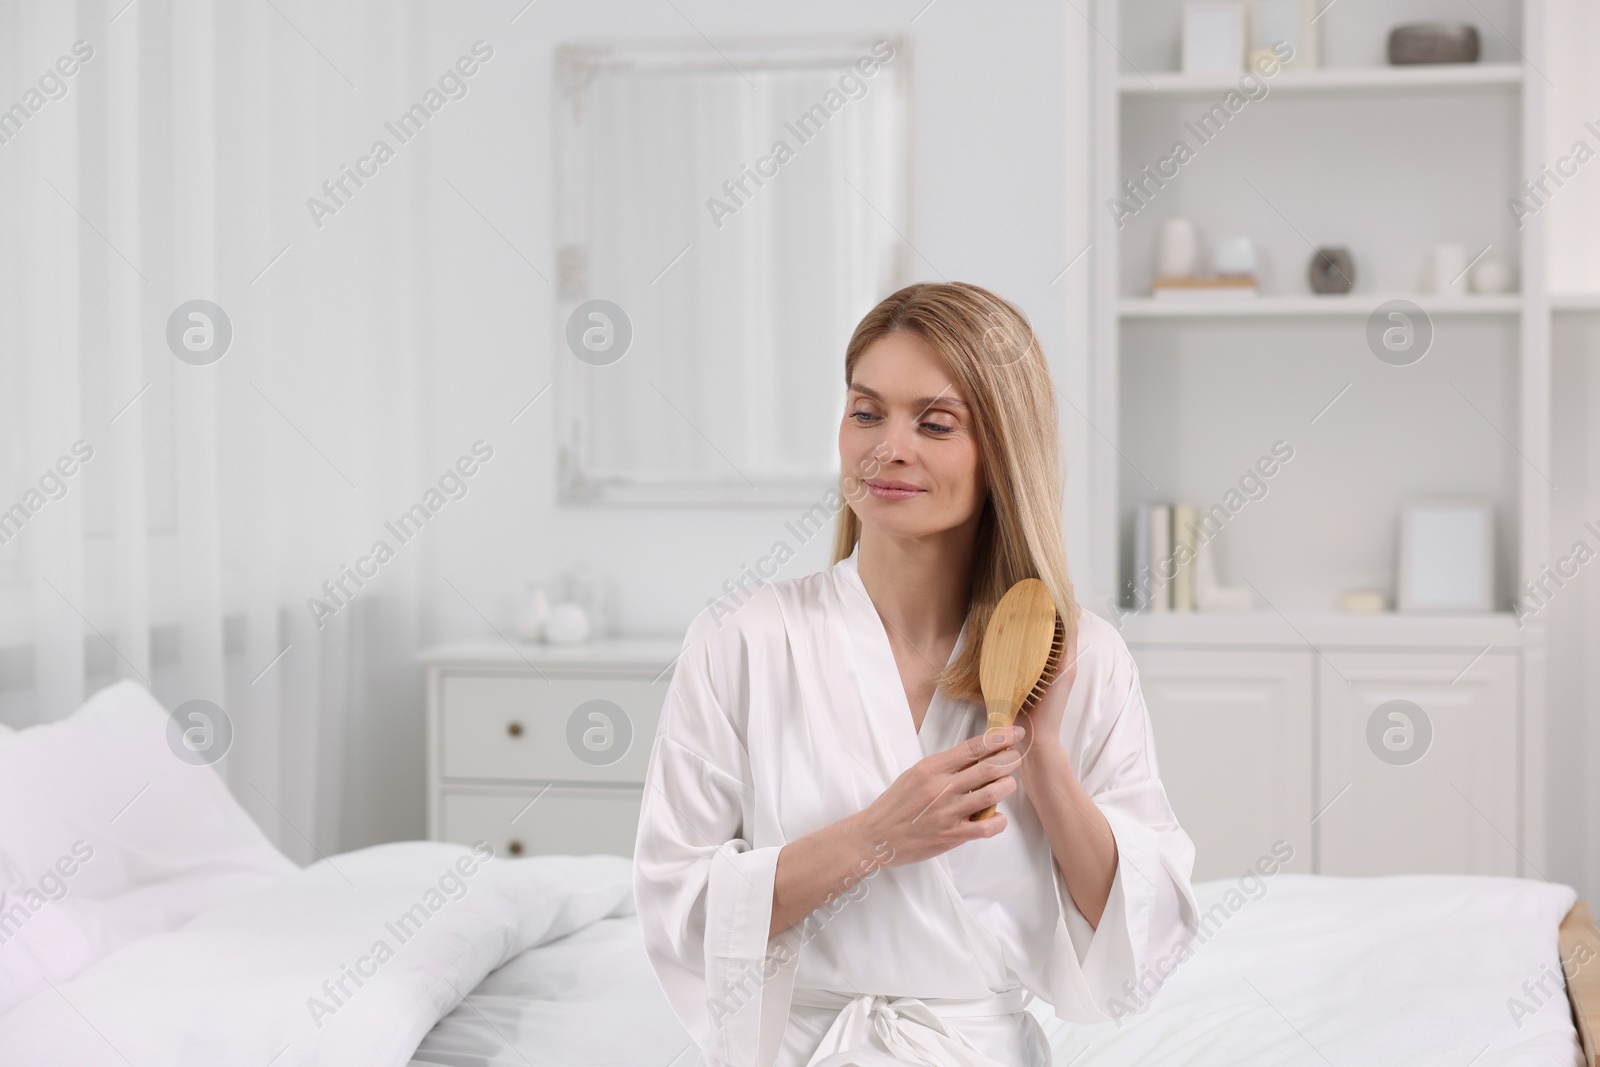 Photo of Beautiful woman brushing her hair on bed in room